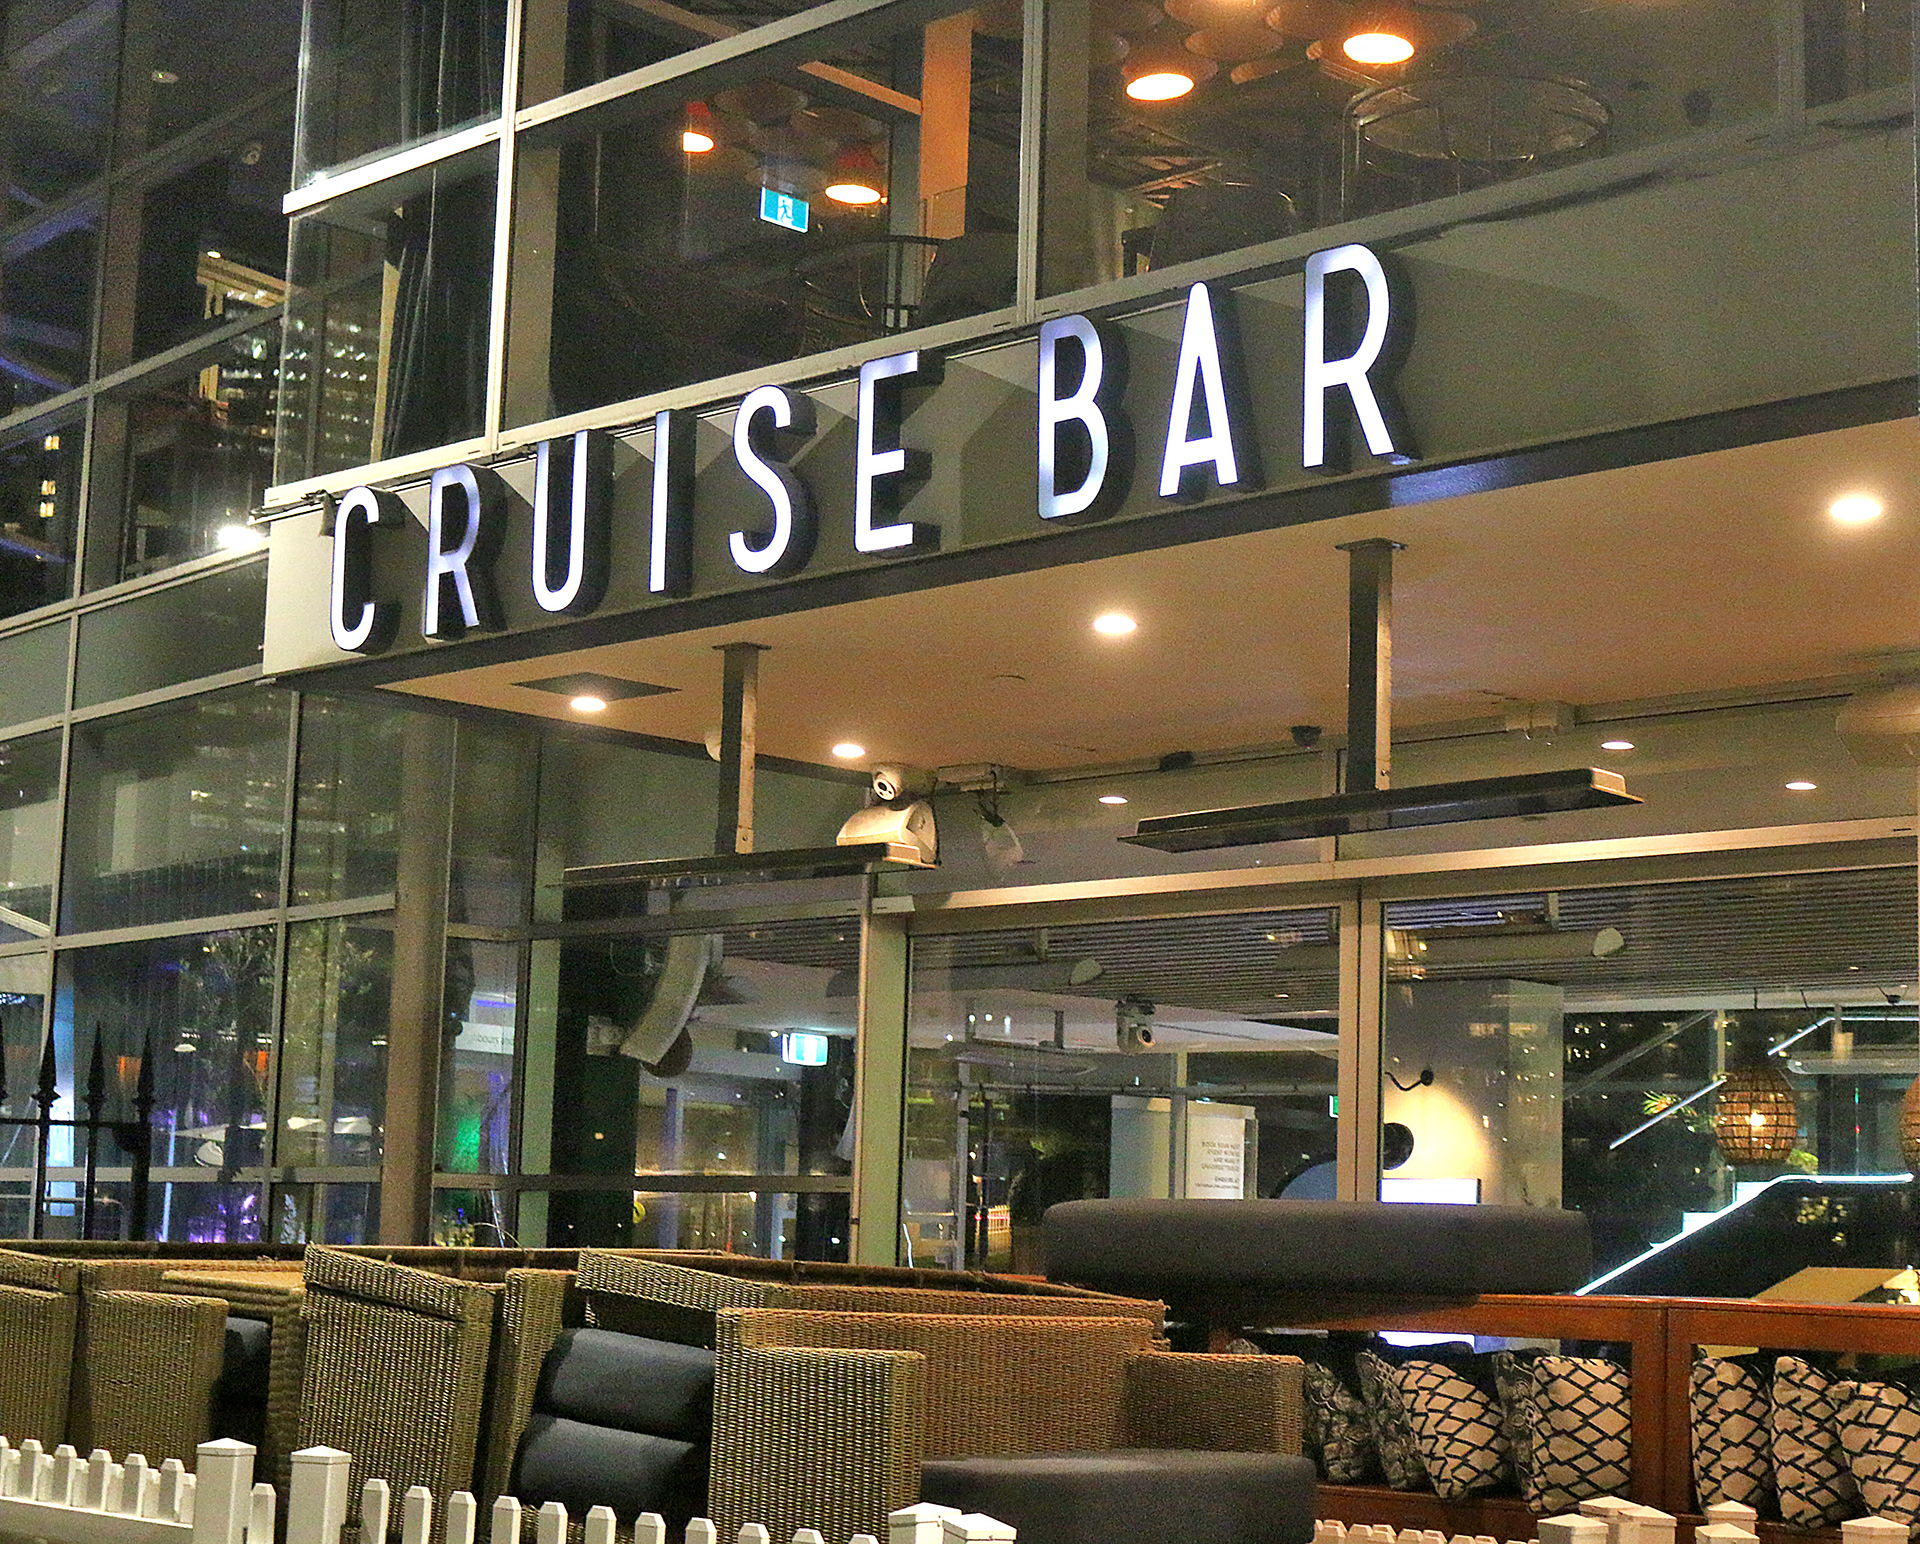 a cruise bar with a sign